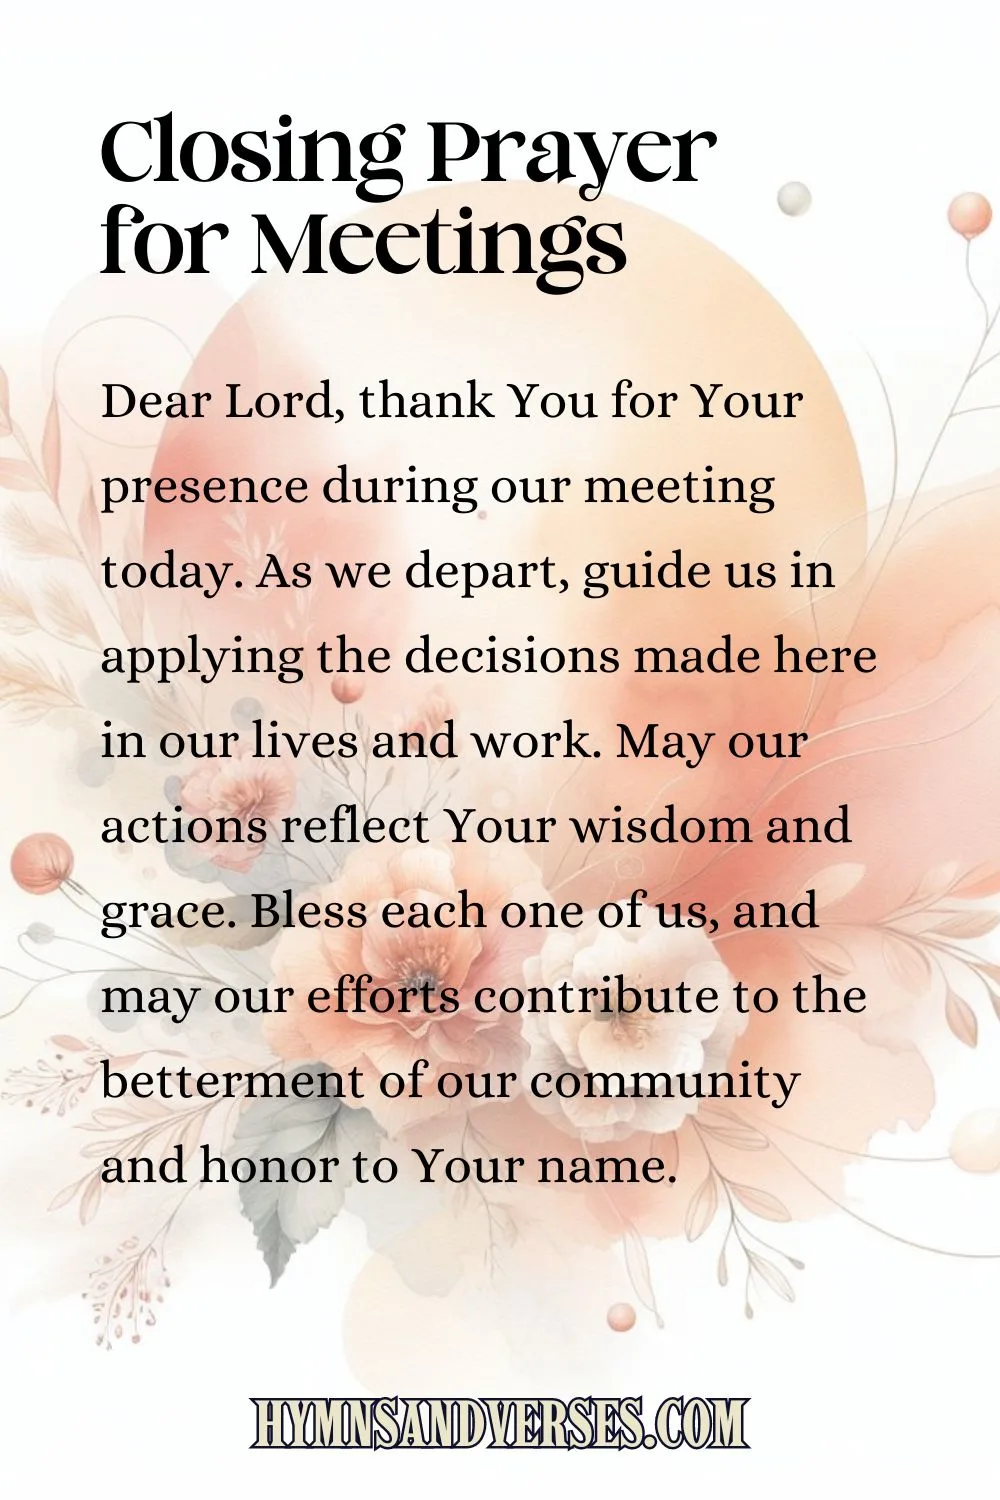 Pin sized image for closing prayer for meetings, reads: Dear Lord, thank You for Your presence during our meeting today. As we depart, guide us in applying the decisions made here in our lives and work. May our actions reflect Your wisdom and grace. Bless each one of us, and may our efforts contribute to the betterment of our community and honor to Your name.